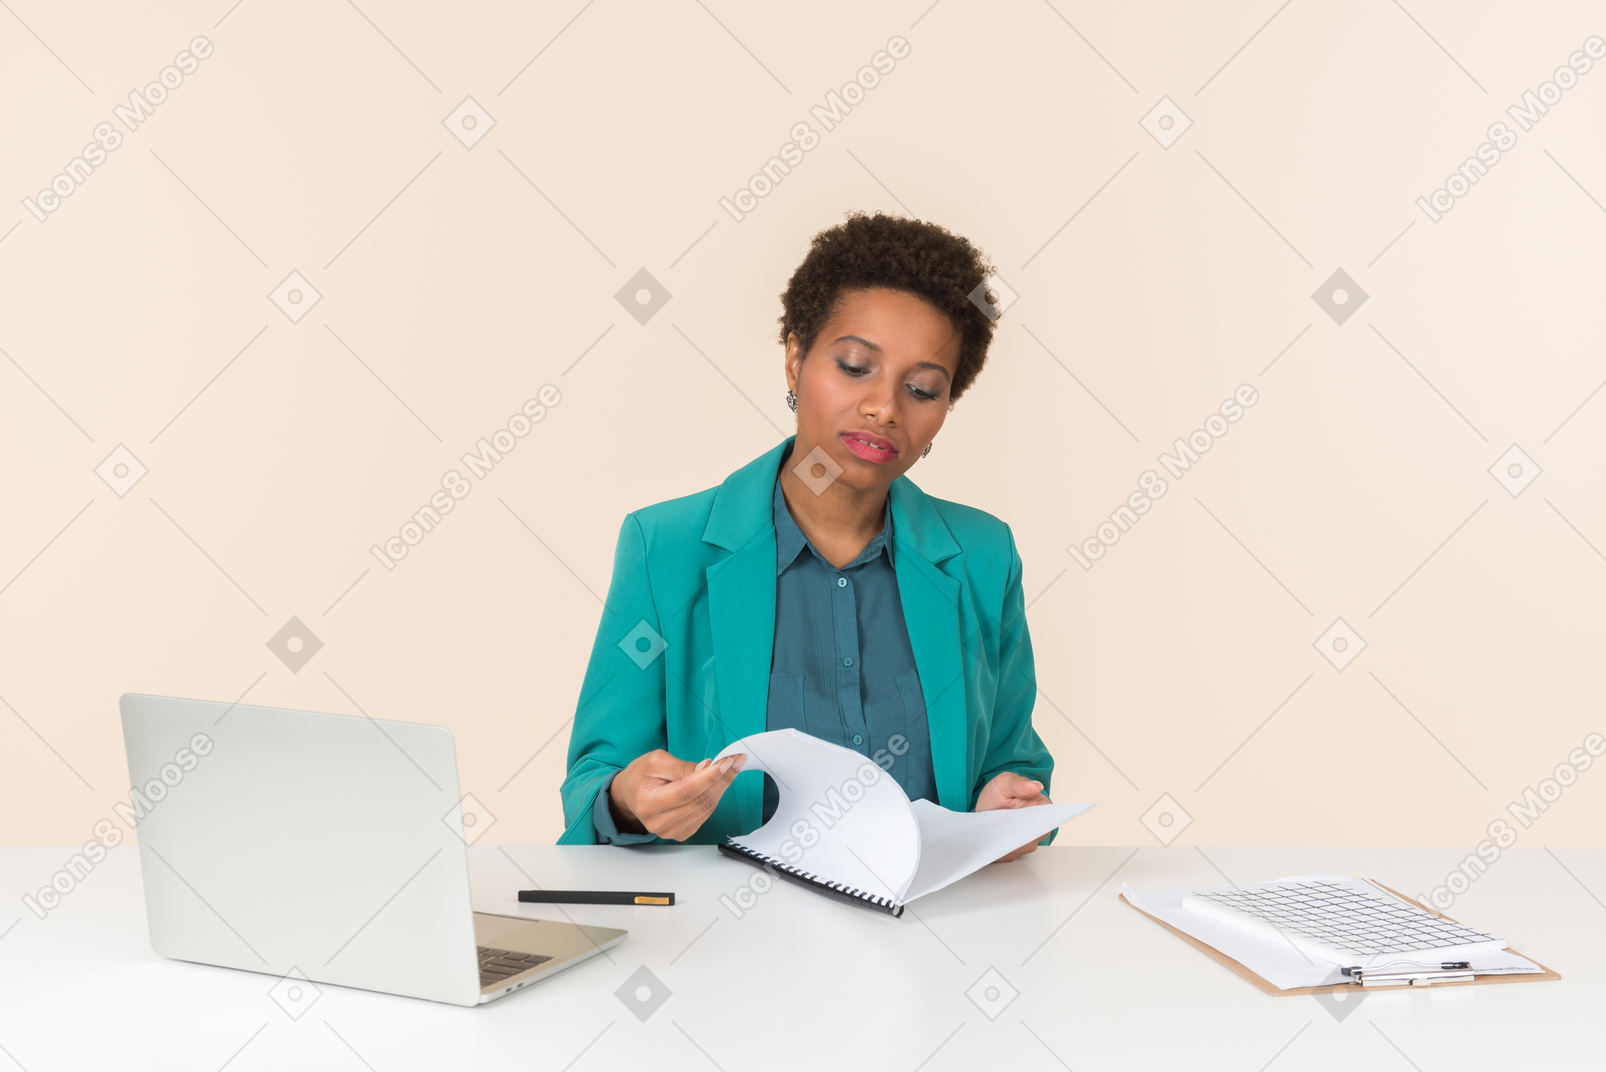 Getting through document to double check it